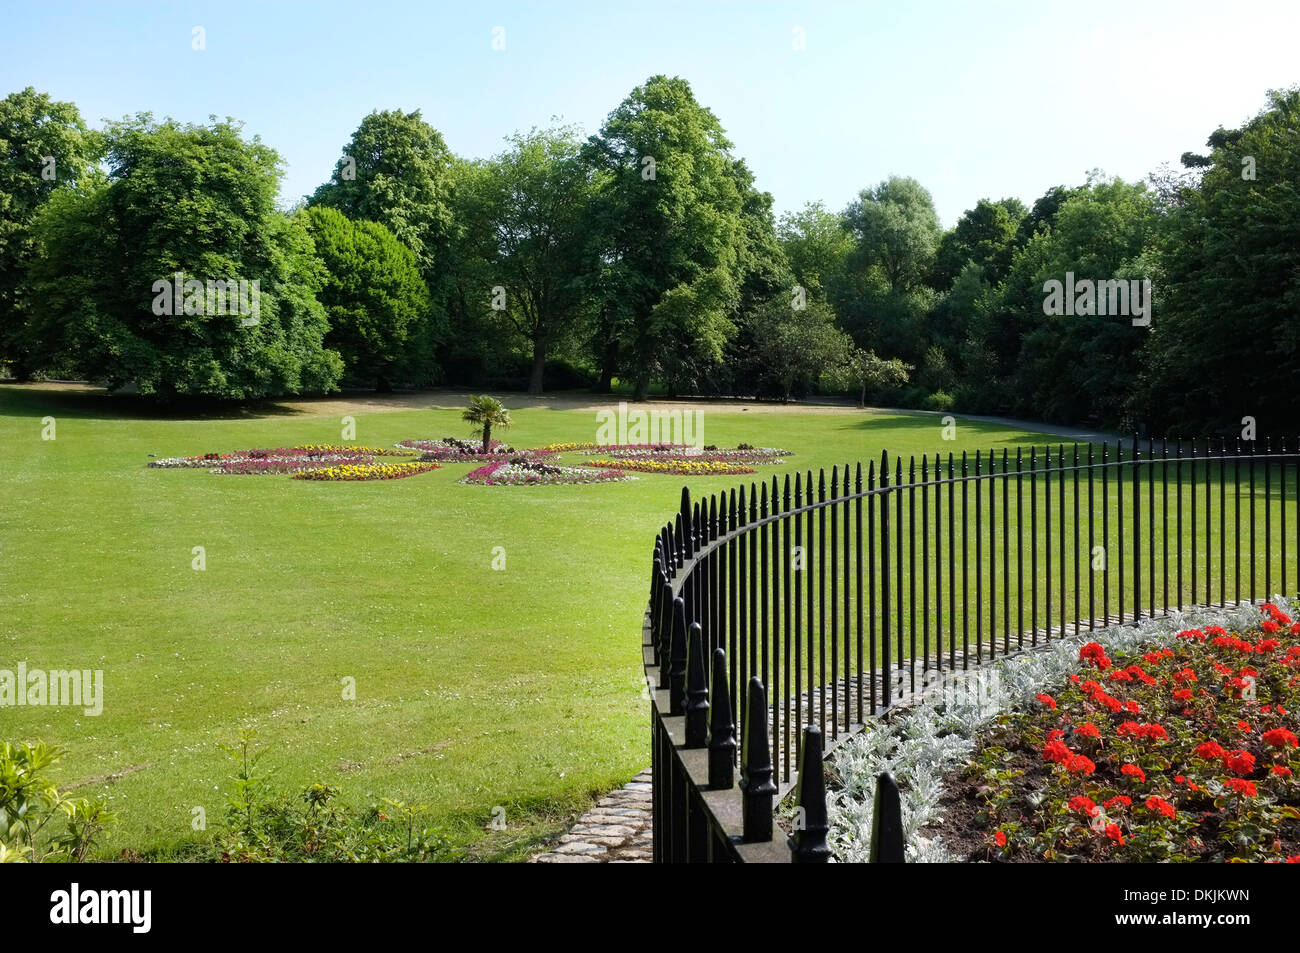 Flower beds at Roundhay Park, Leeds, Yorkshire Stock Photo